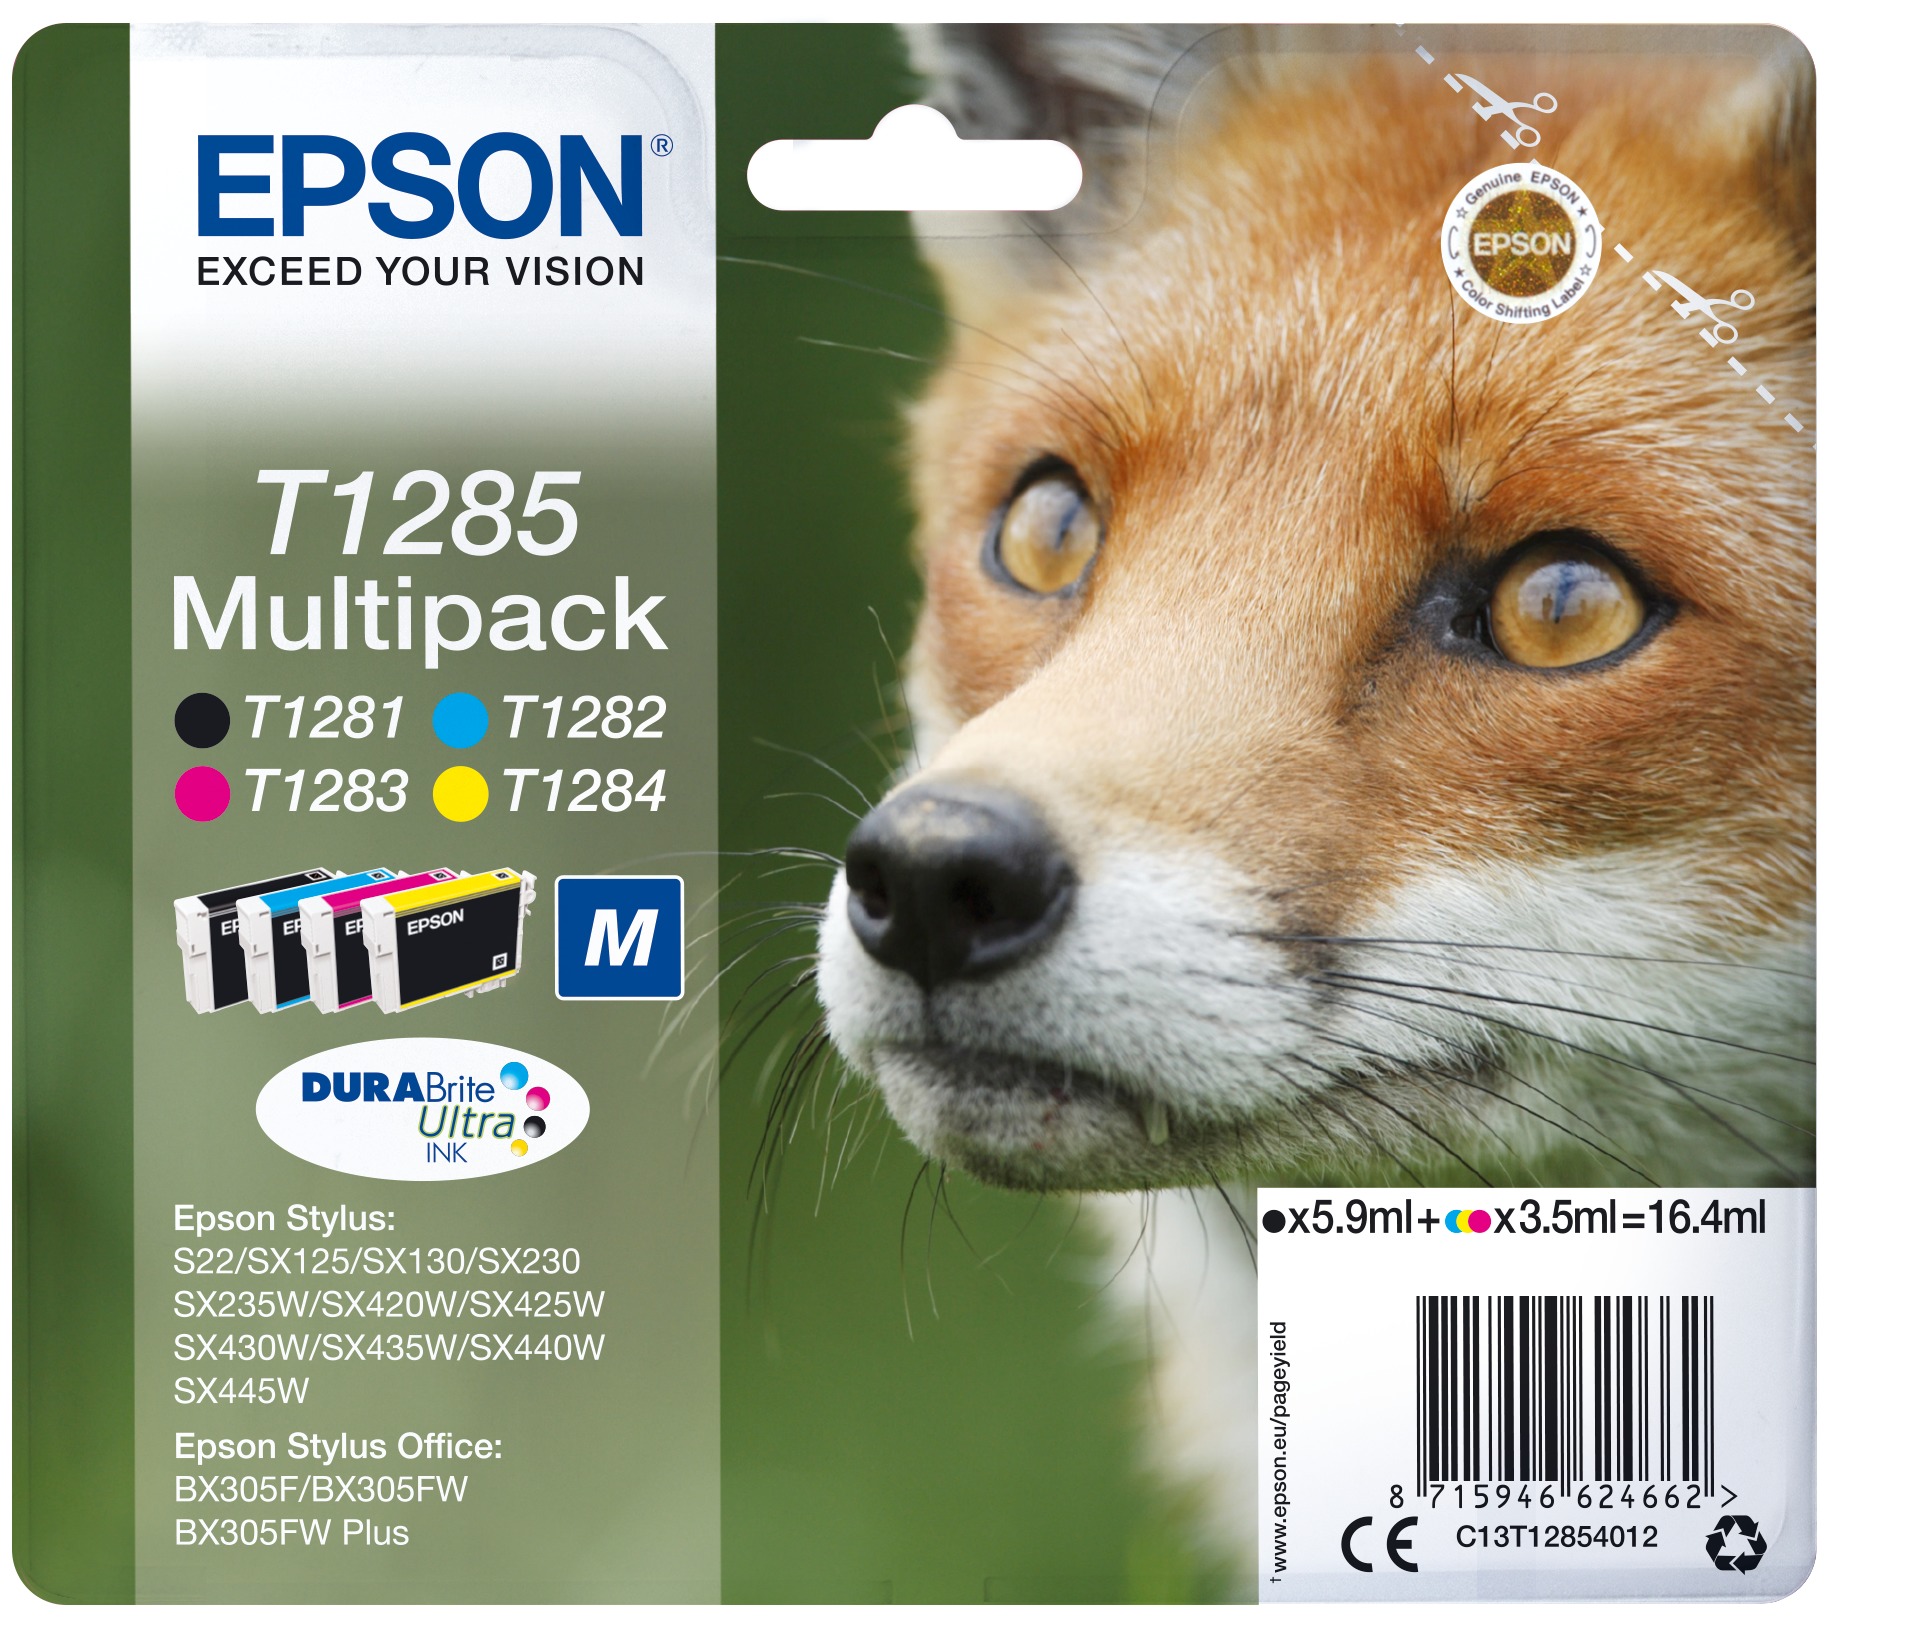 Epson T1285 multipack - Vos Inkt